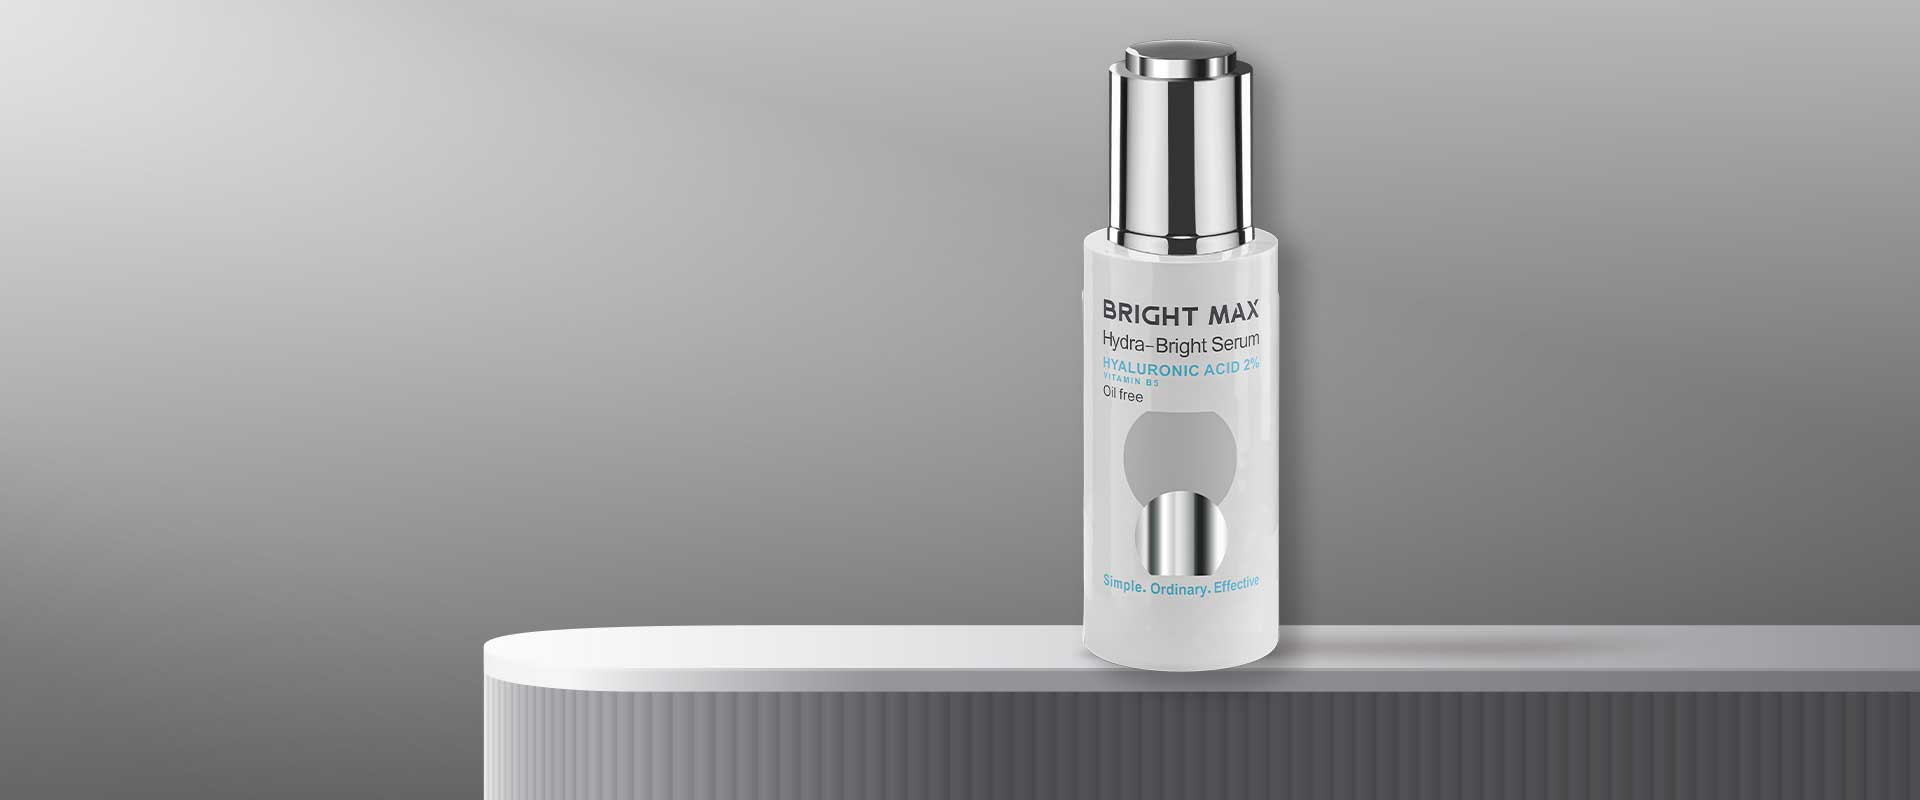 Hyaluronic Acid Bright Max